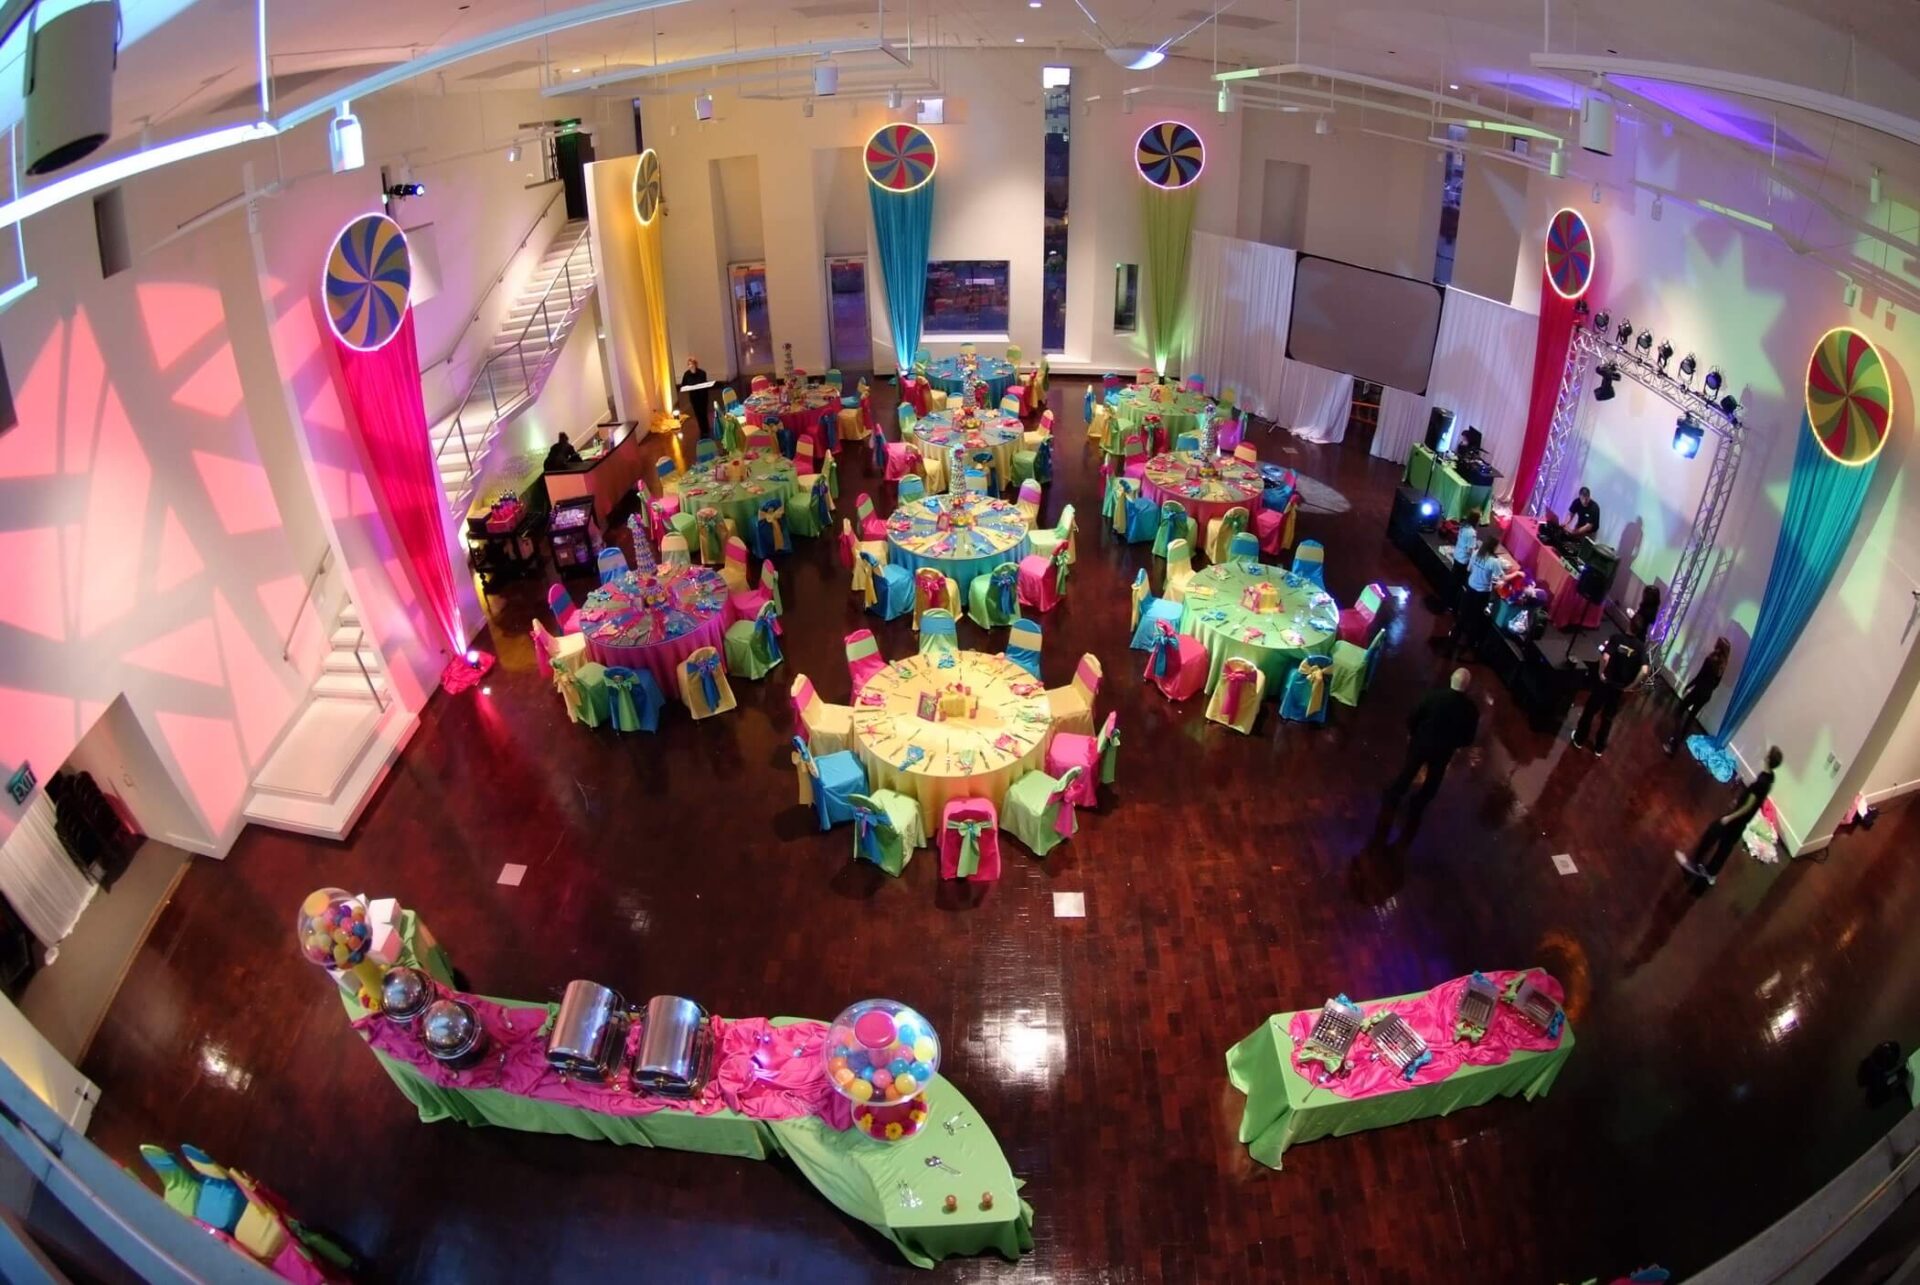 The Total View Of an Event with Colorful Chairs